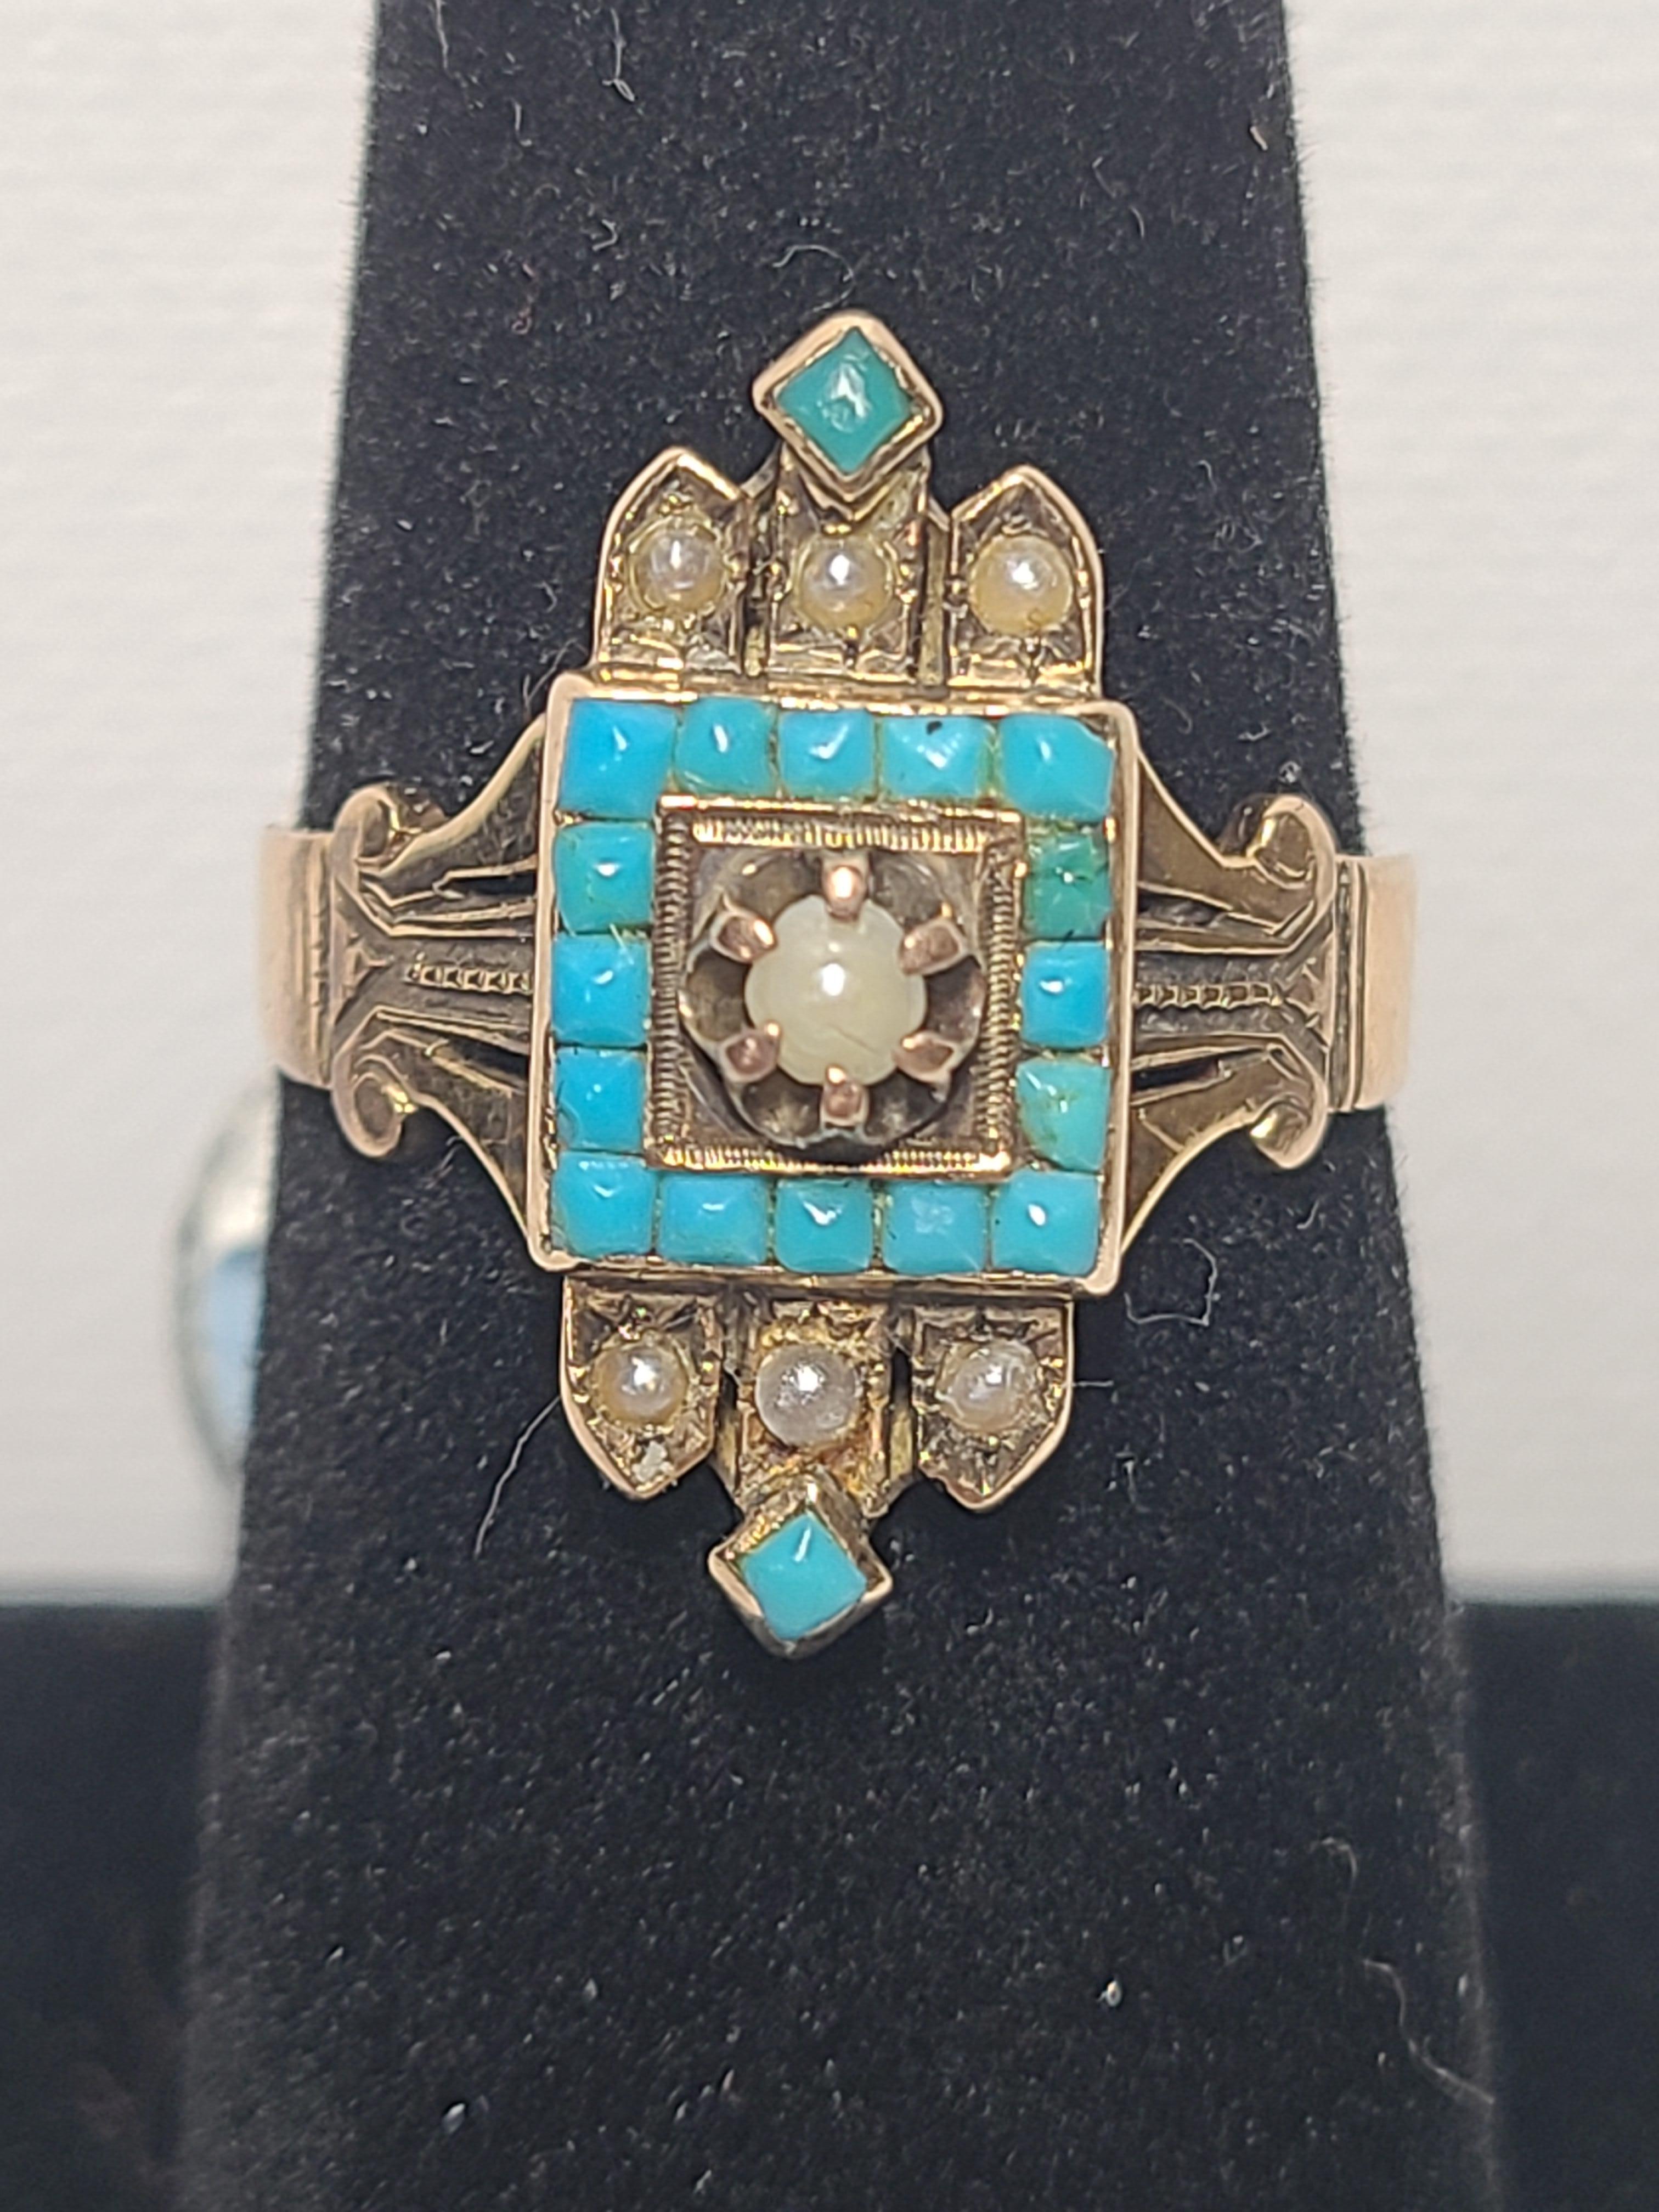 A beautiful example of Victorian era fashion. This 14K yellow gold ring features 18 square cut turquoise stones and 7 seed pearls set in an ornately art carved setting.
The ring is size 8.25 (US) and weighs 4.8 grams.